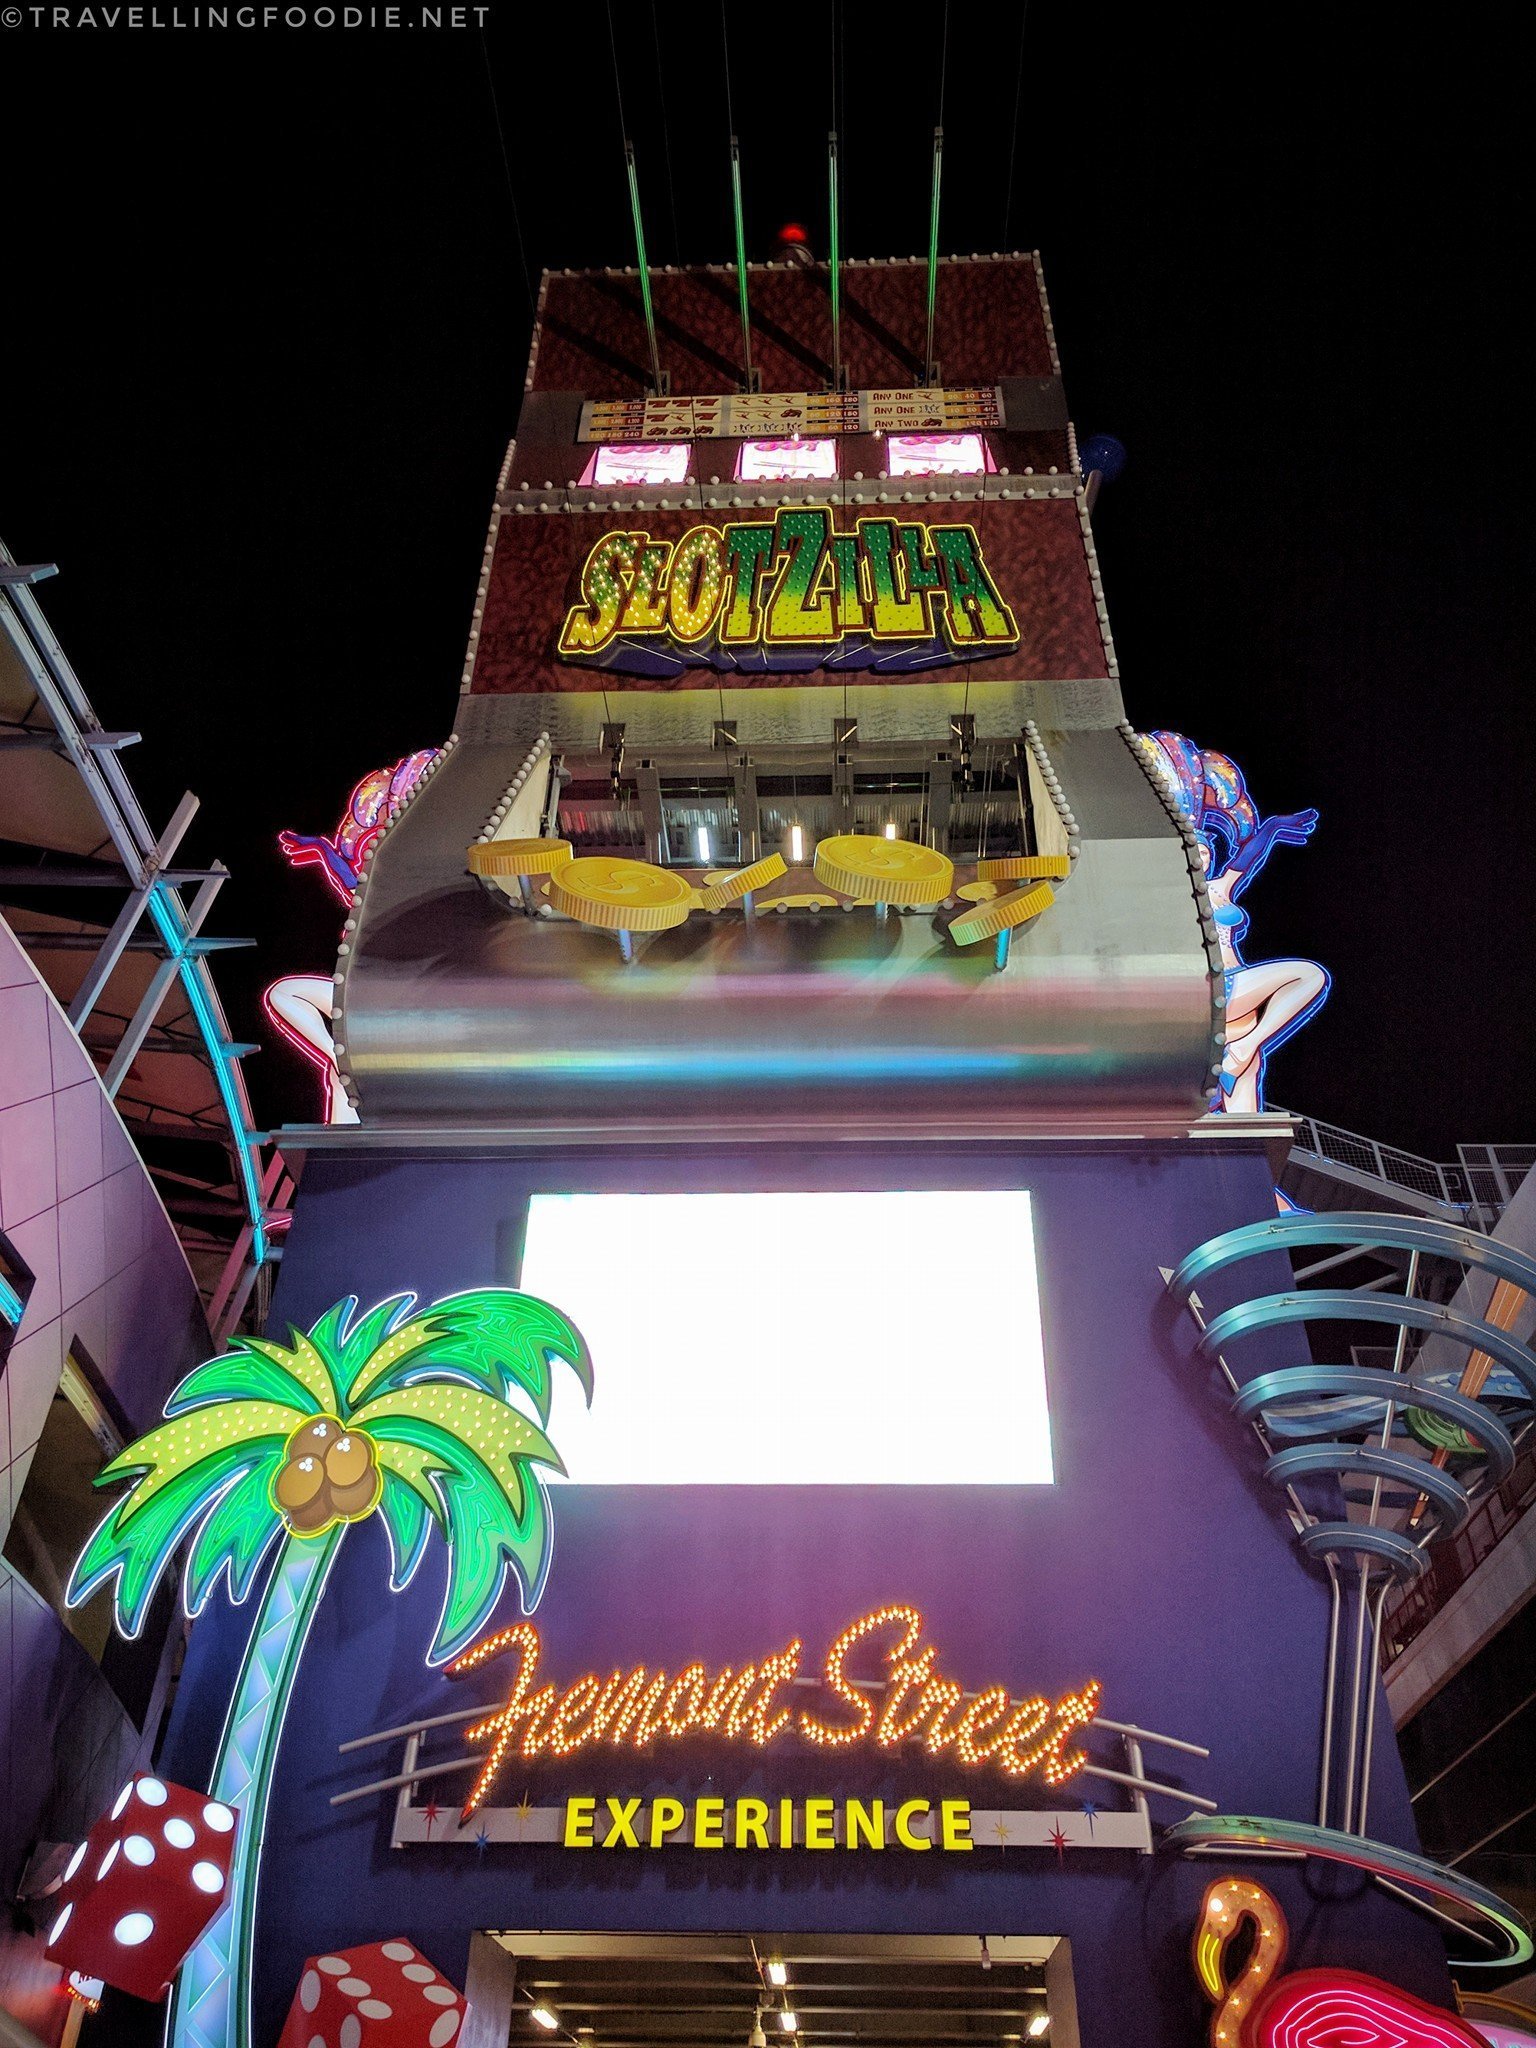 Travelling Foodie Tours Fremont Street Experience